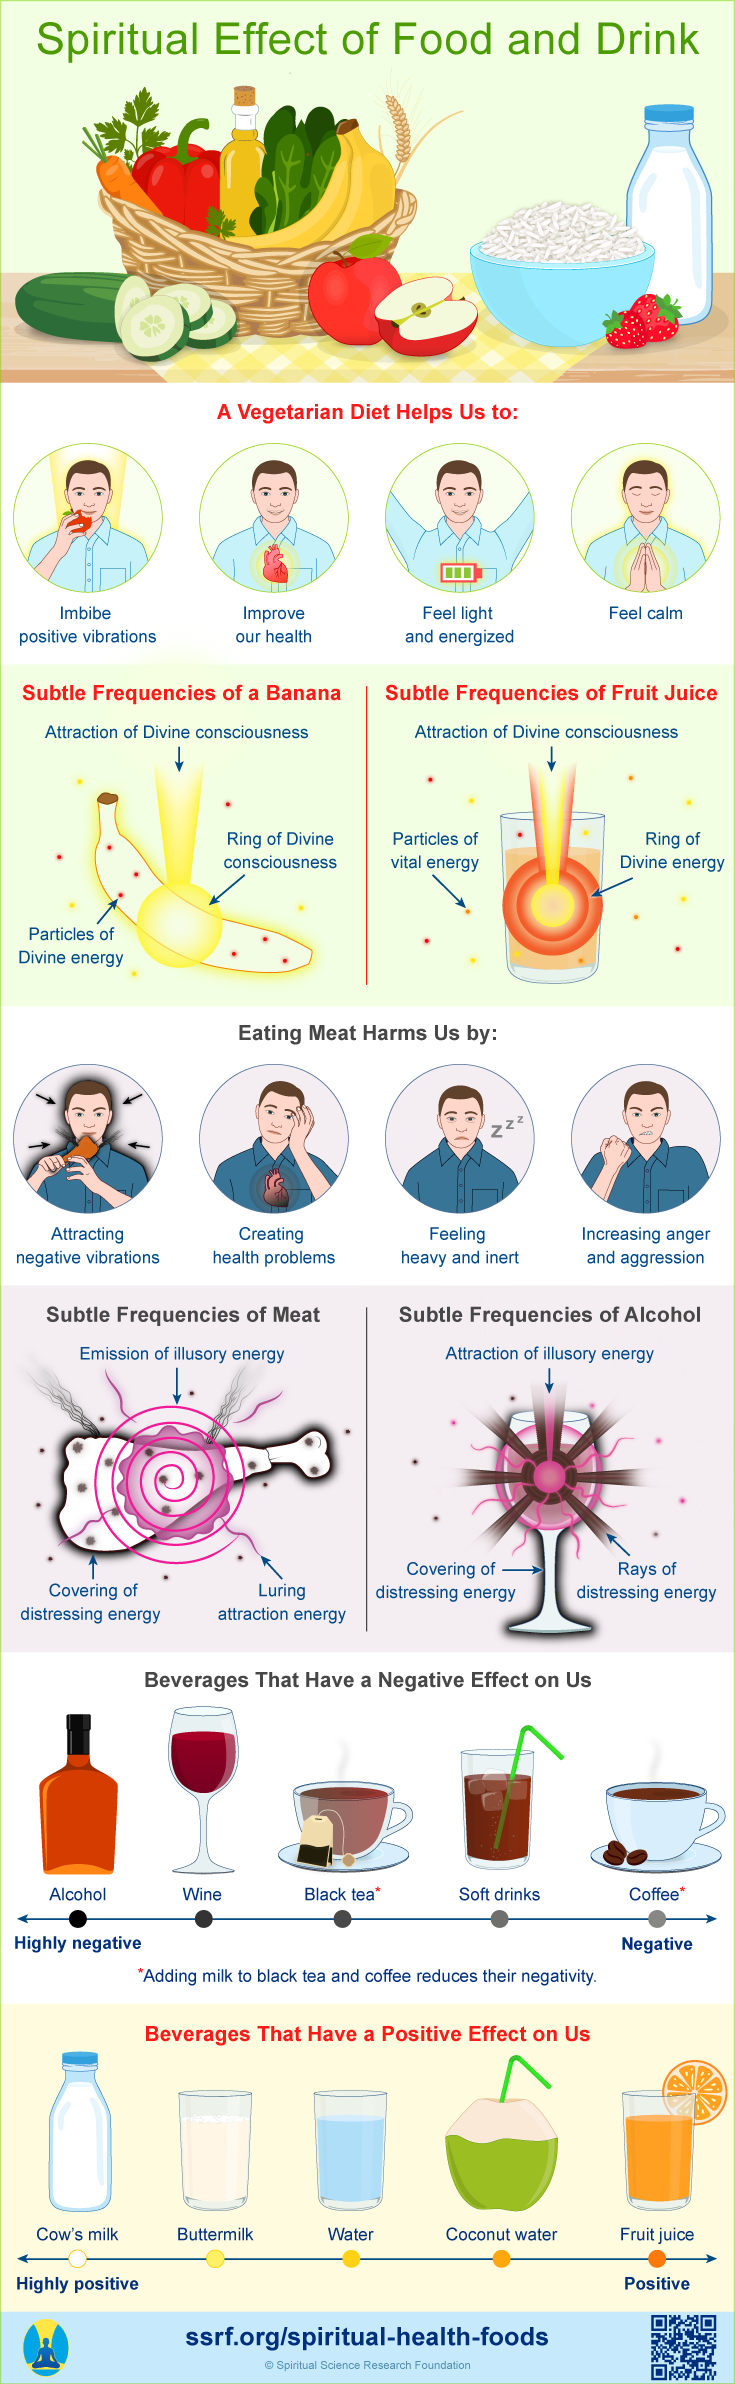 Spiritual Effects of Food and Drink 